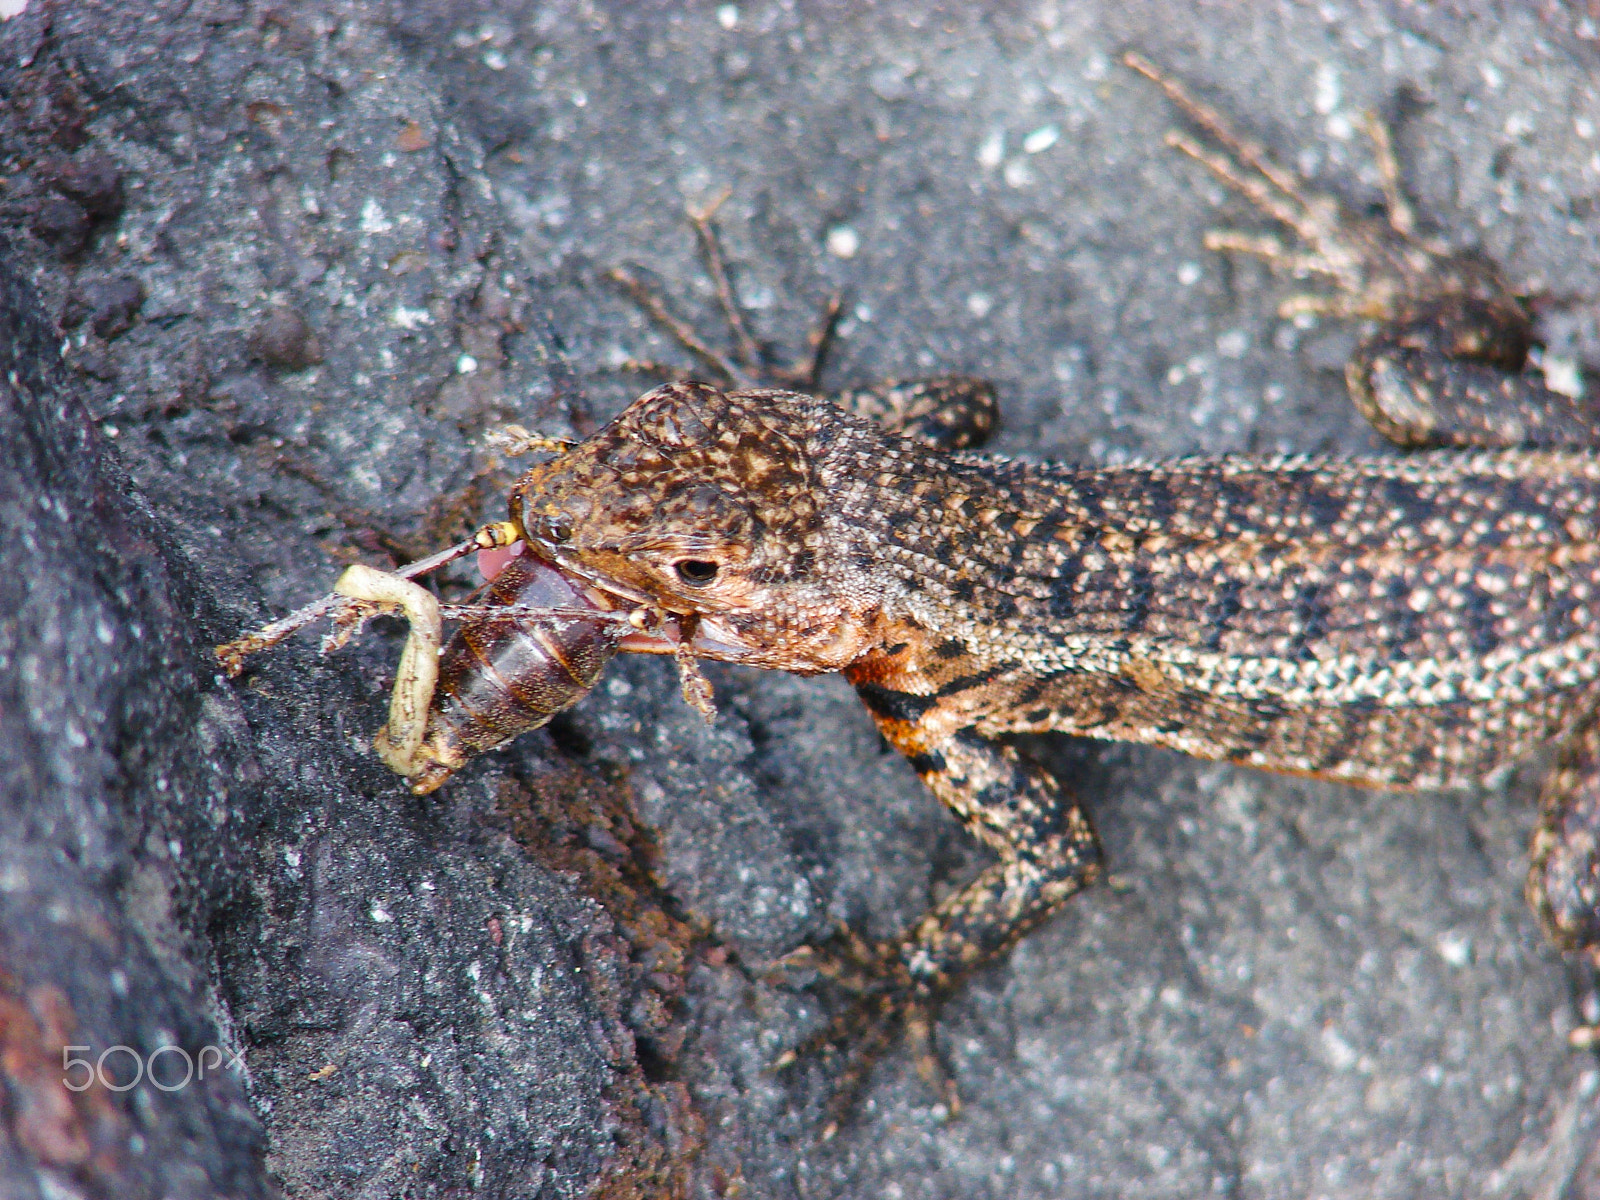 Sony DSC-H2 sample photo. Lizard eating a cricket in the galapagos islands photography